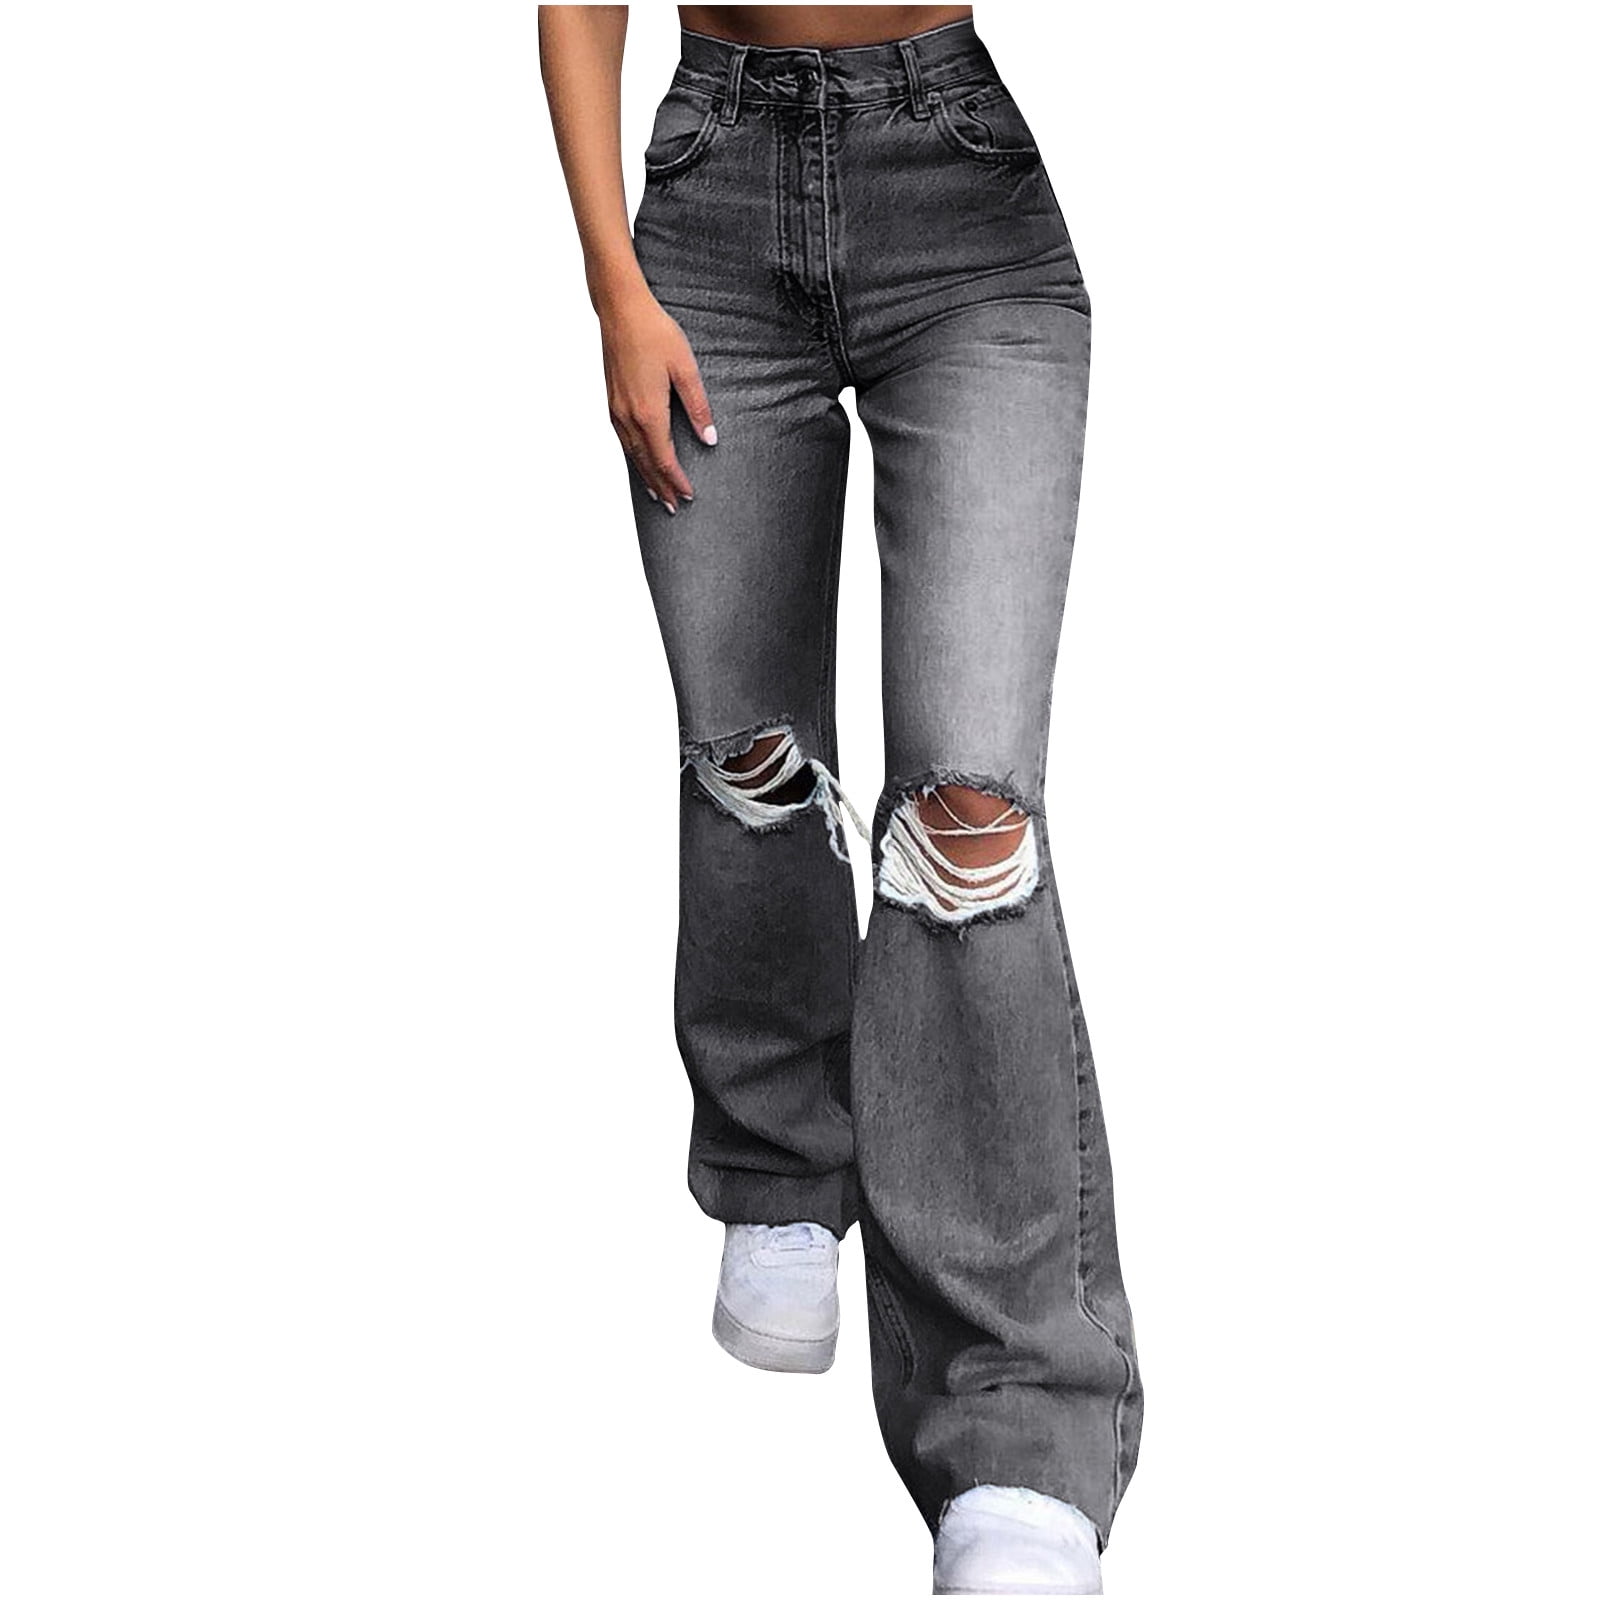 Hfyihgf Women's Ripped Flare Jeans Distressed Bootcut Jeans Stretch ...